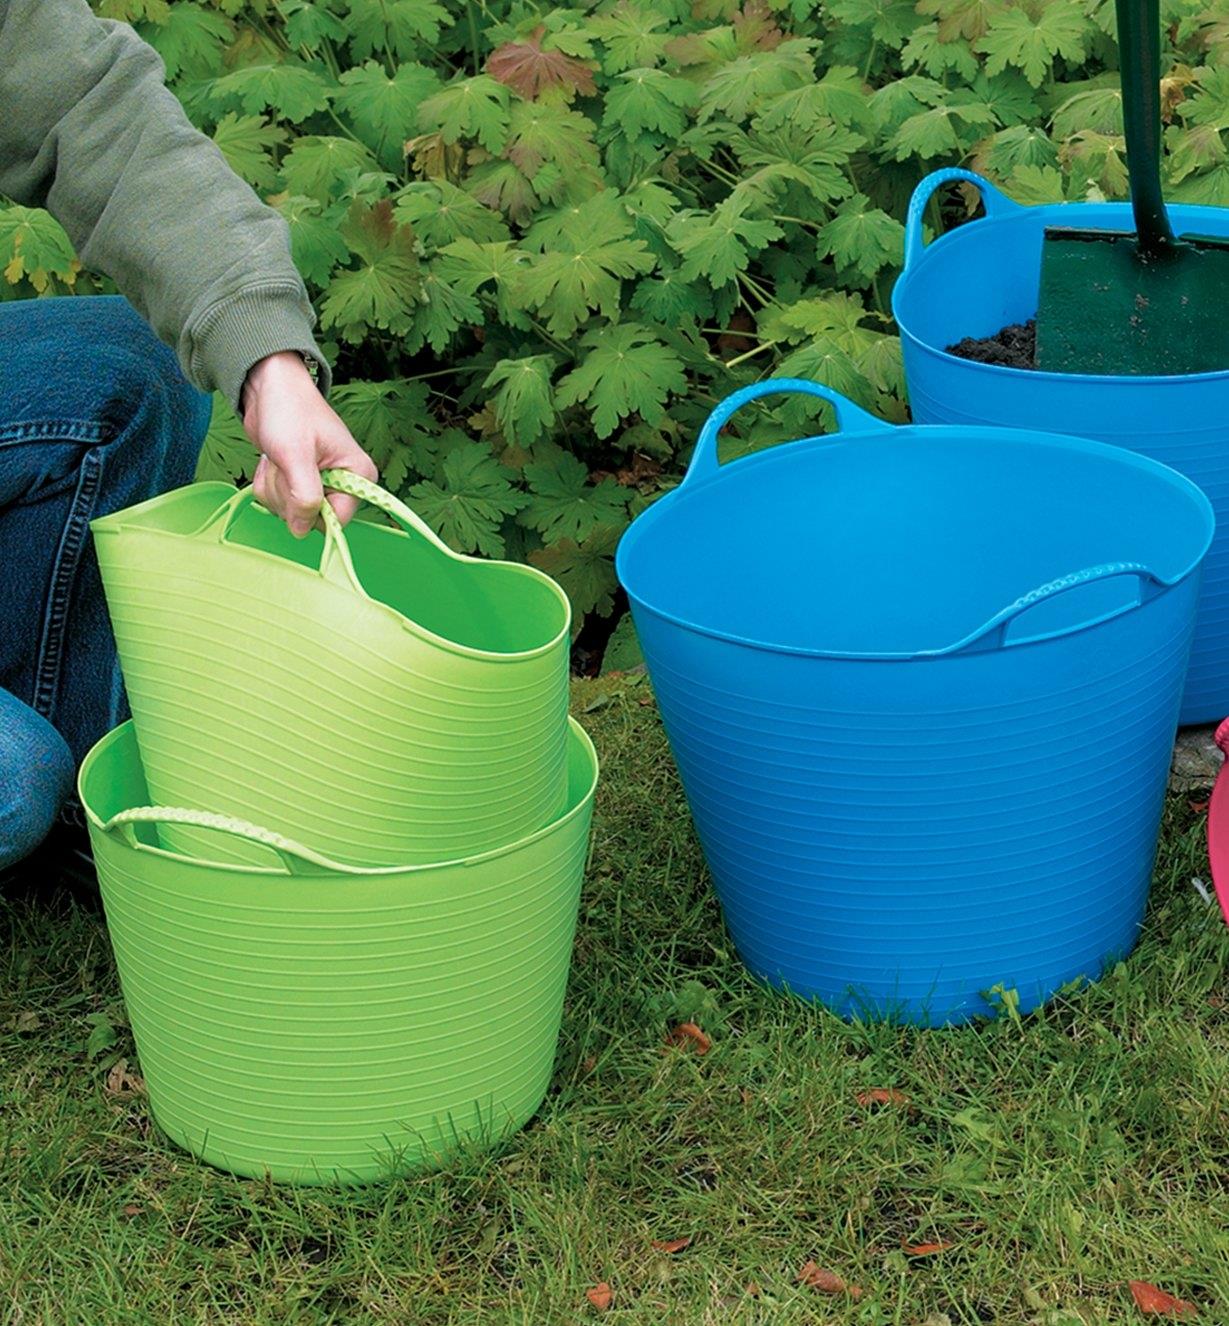 A woman lifts one tubtrug out of another tubtrug